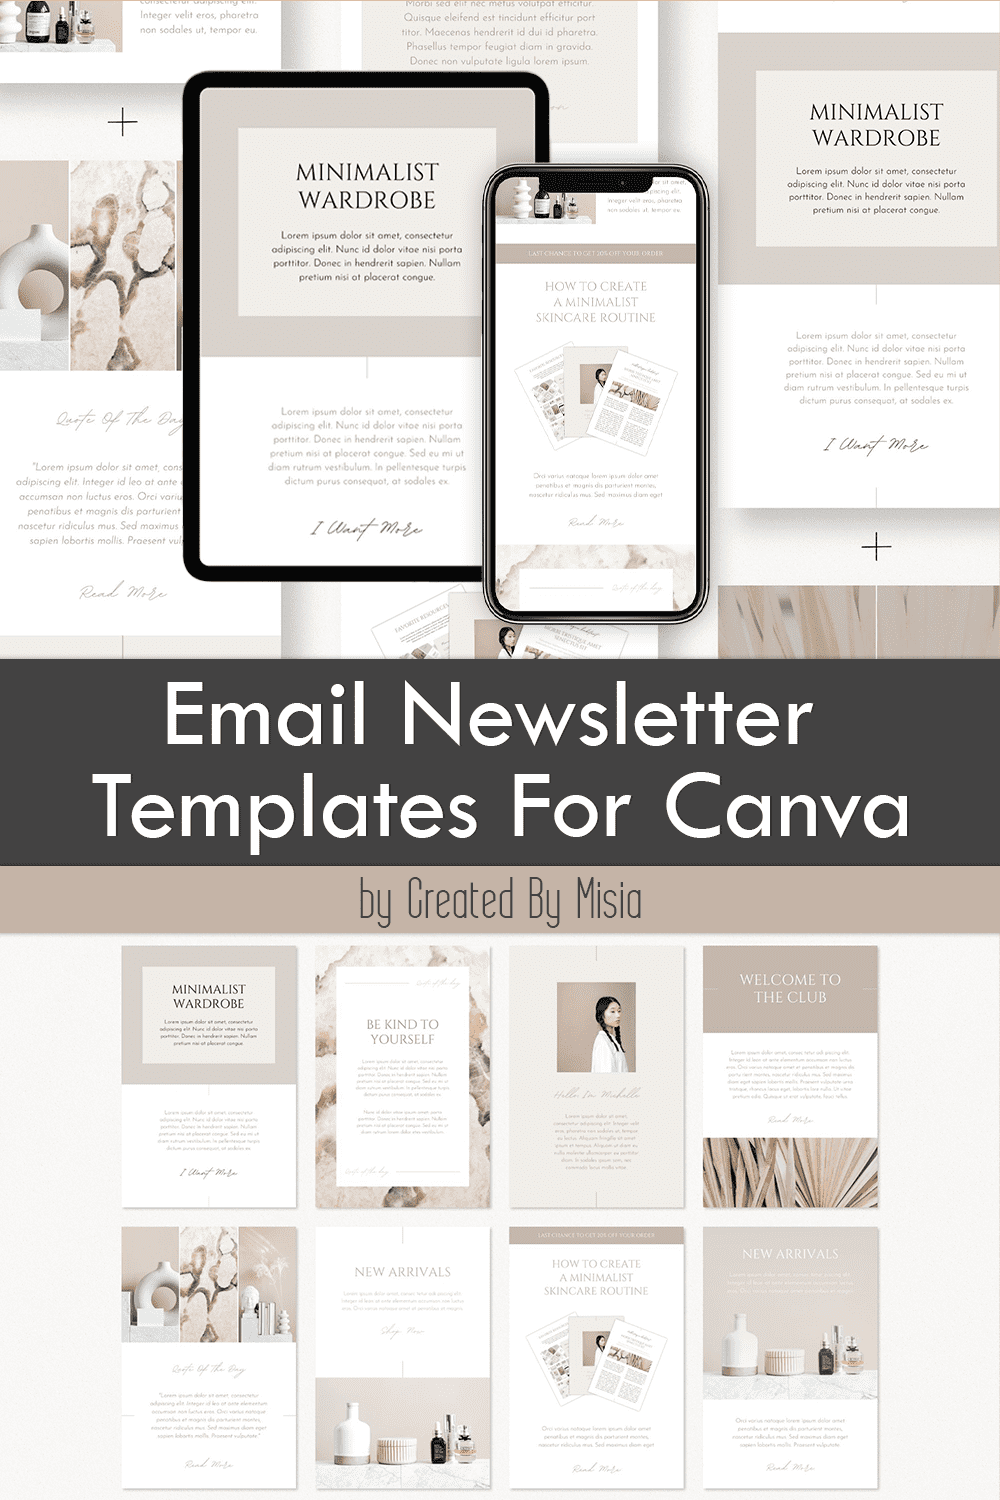 Image collection of beautiful email newsletter design templates.